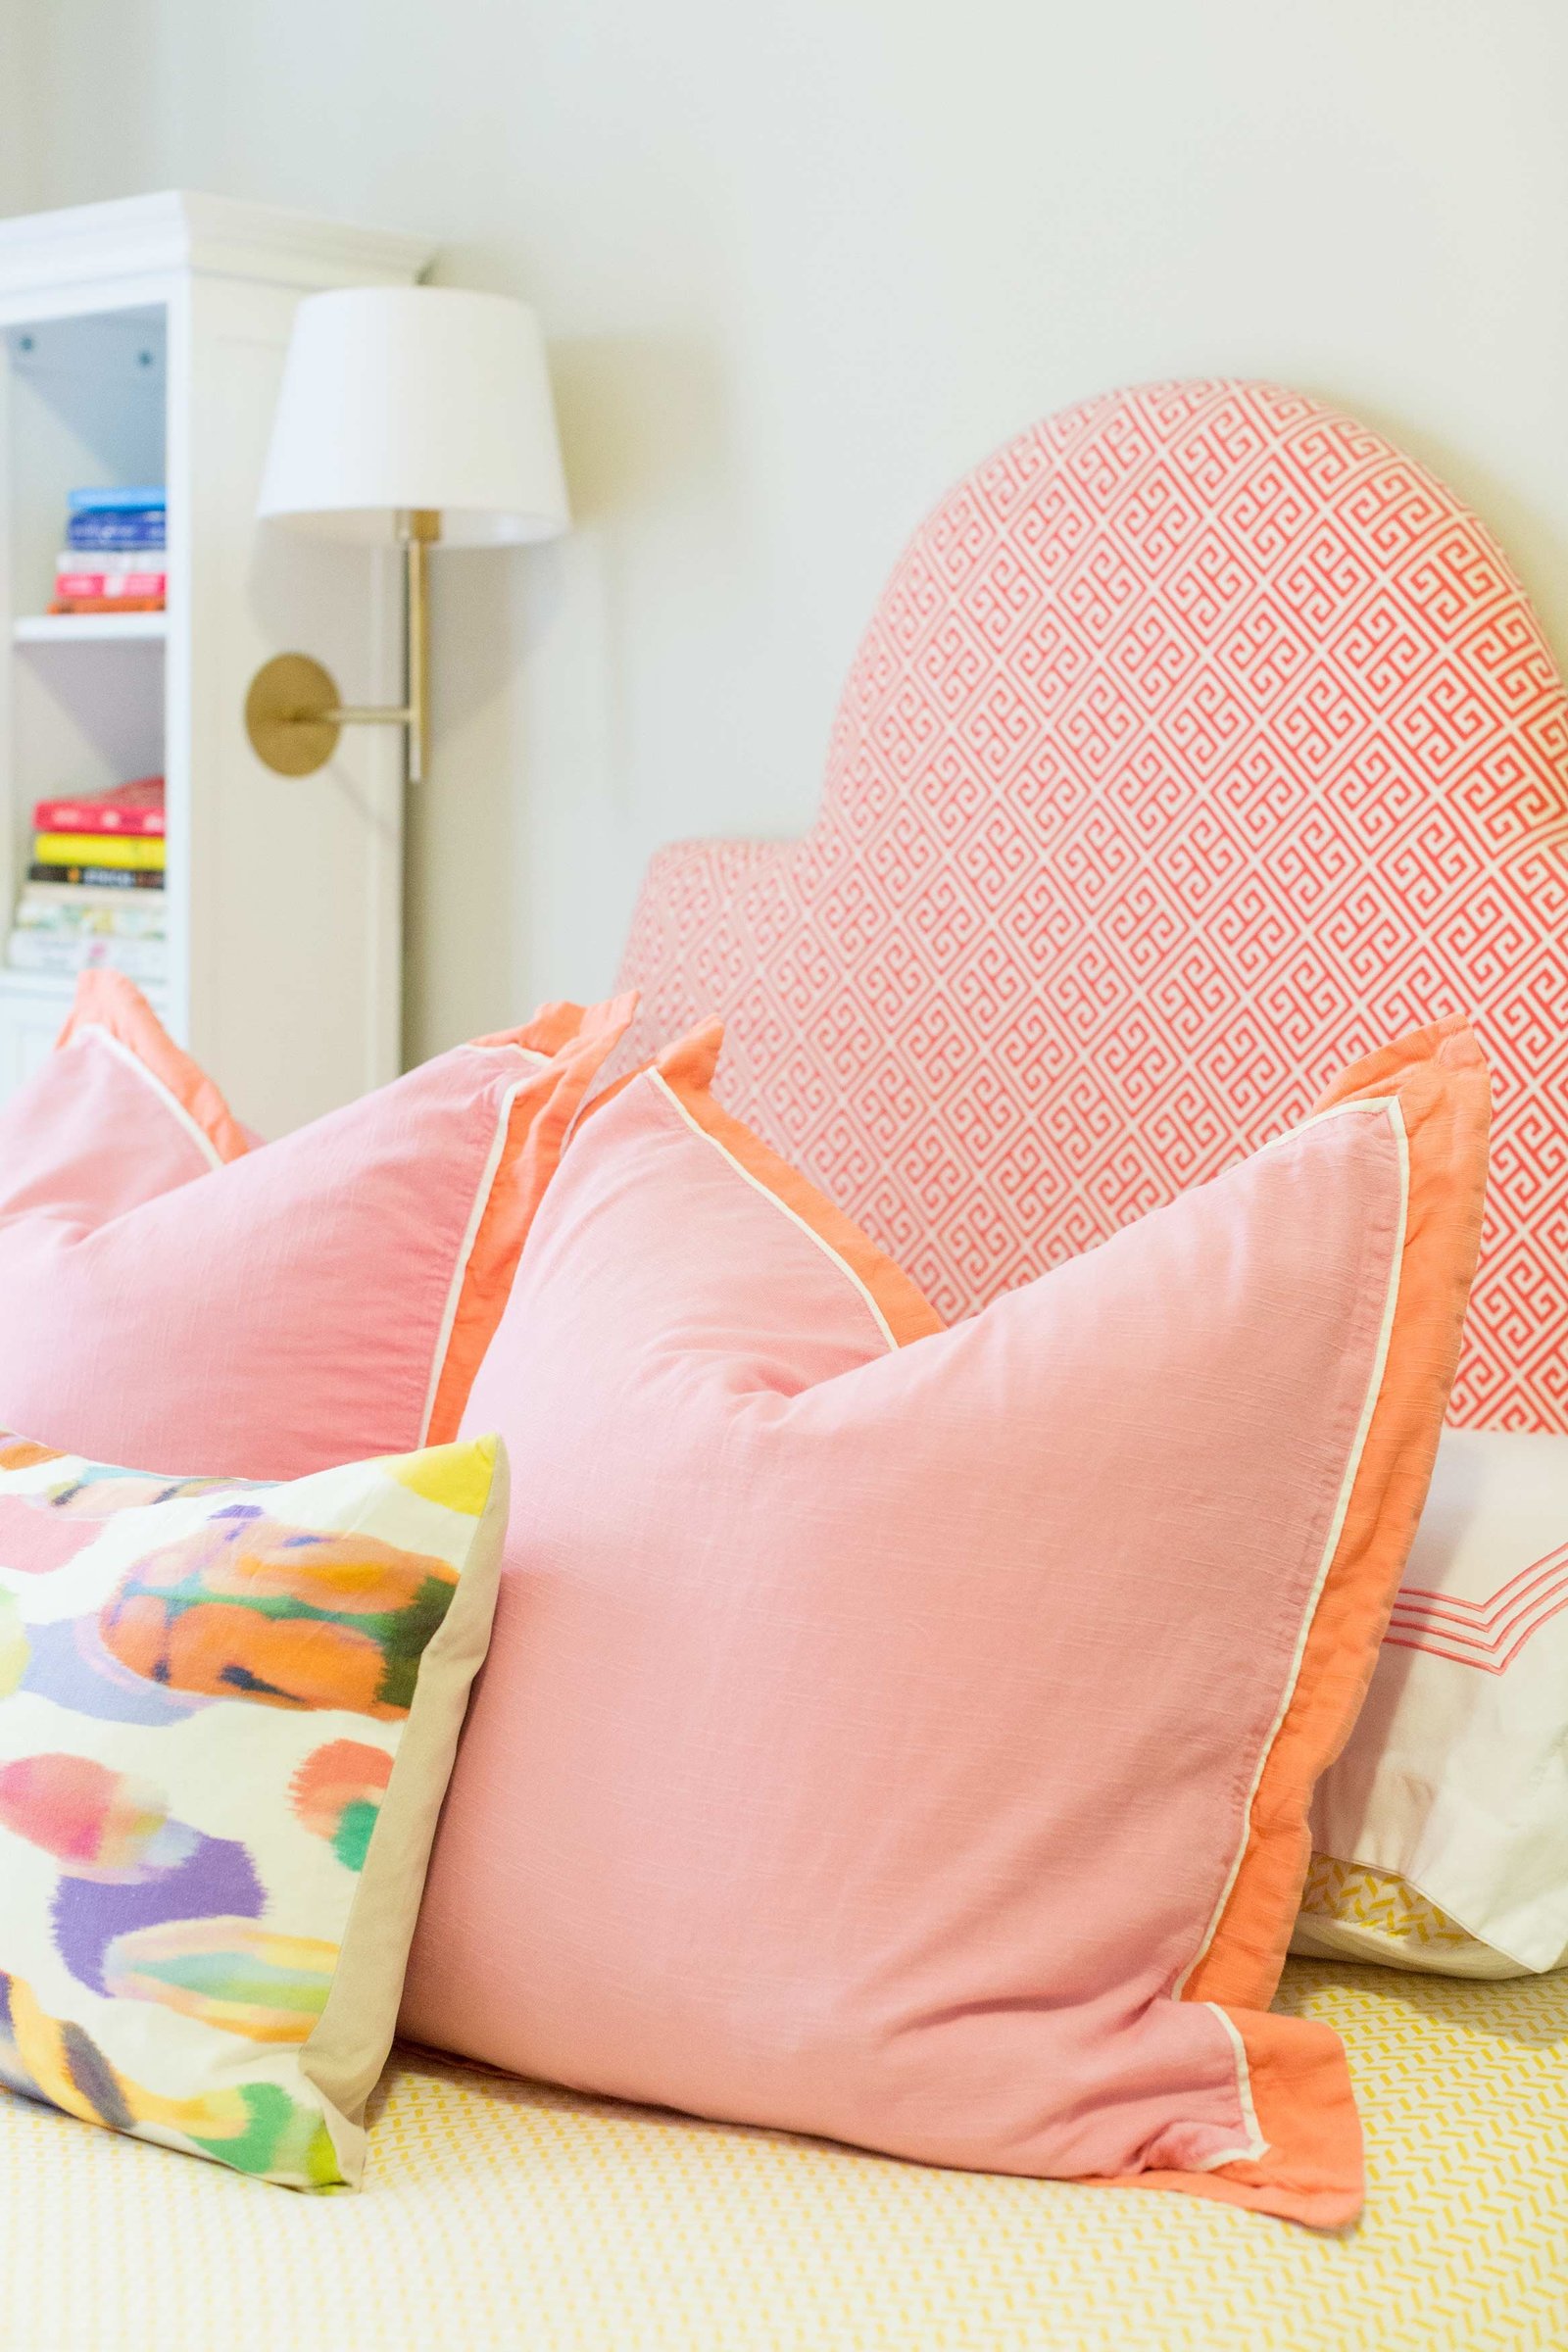 A bed with a pink and orange patterned headboard and pillows.